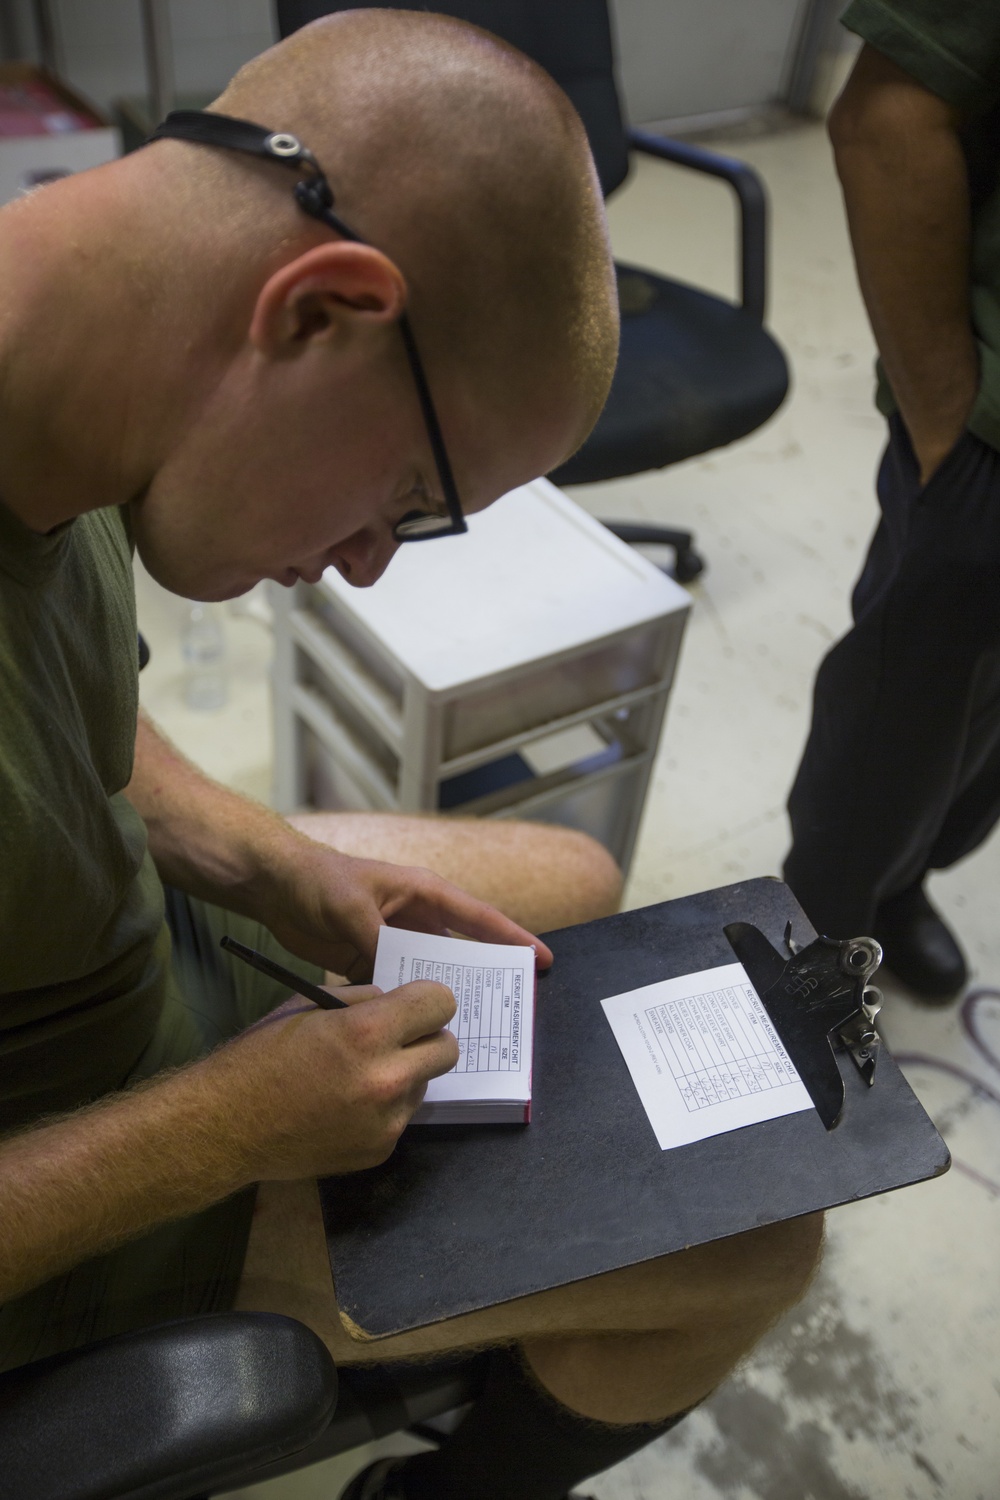 Marine recruits get fitted for the Corps’ uniforms on Parris Island